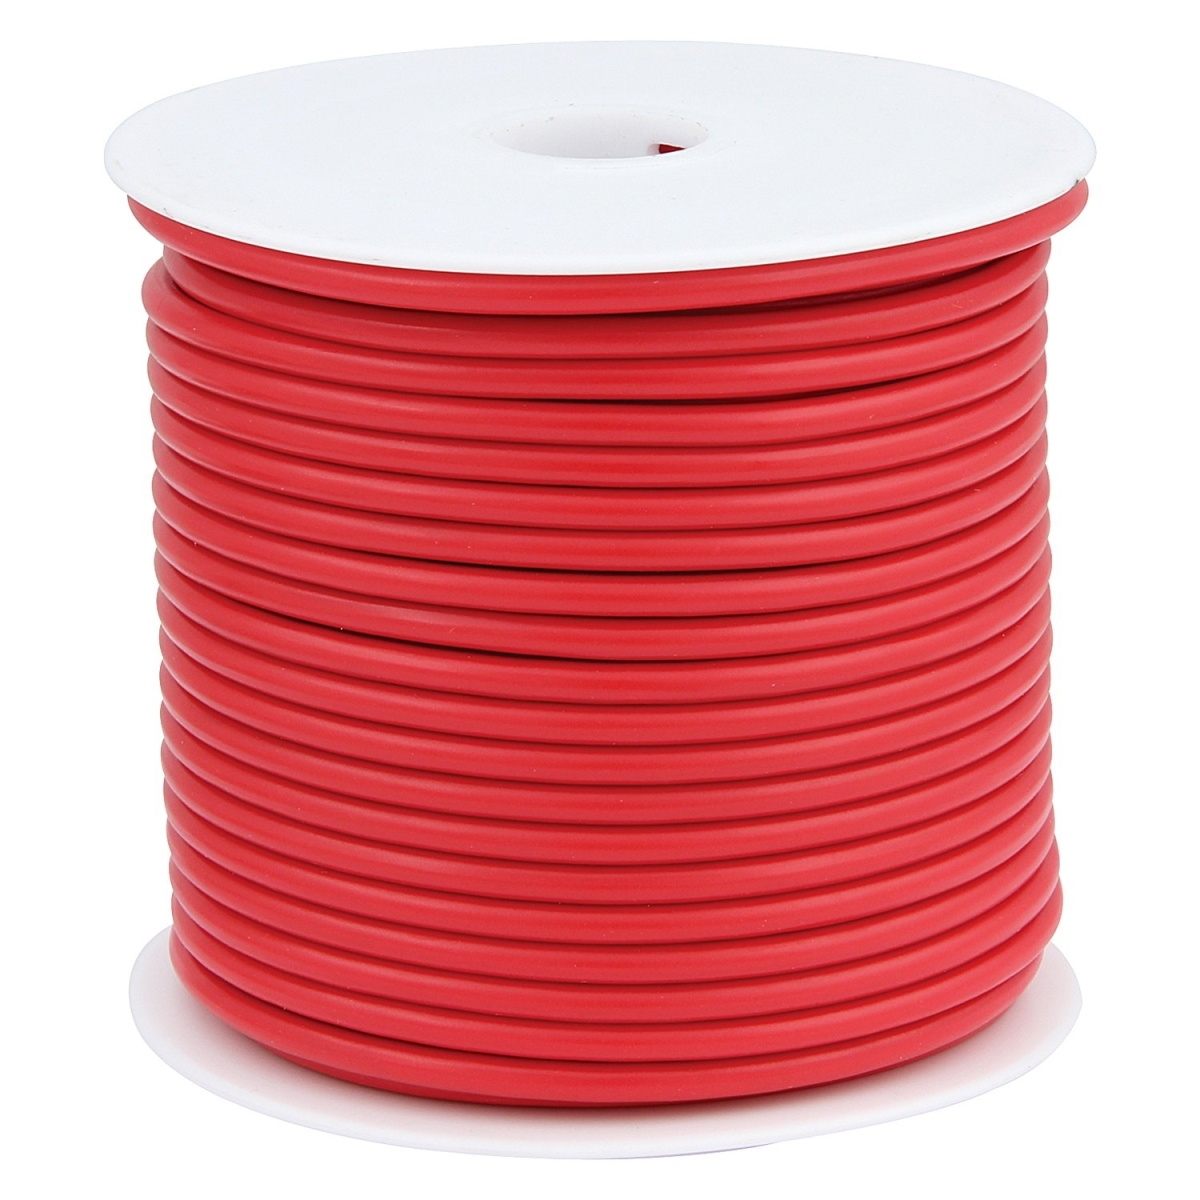 All76575 75 Ft. 10 Awg Red Primary Wire